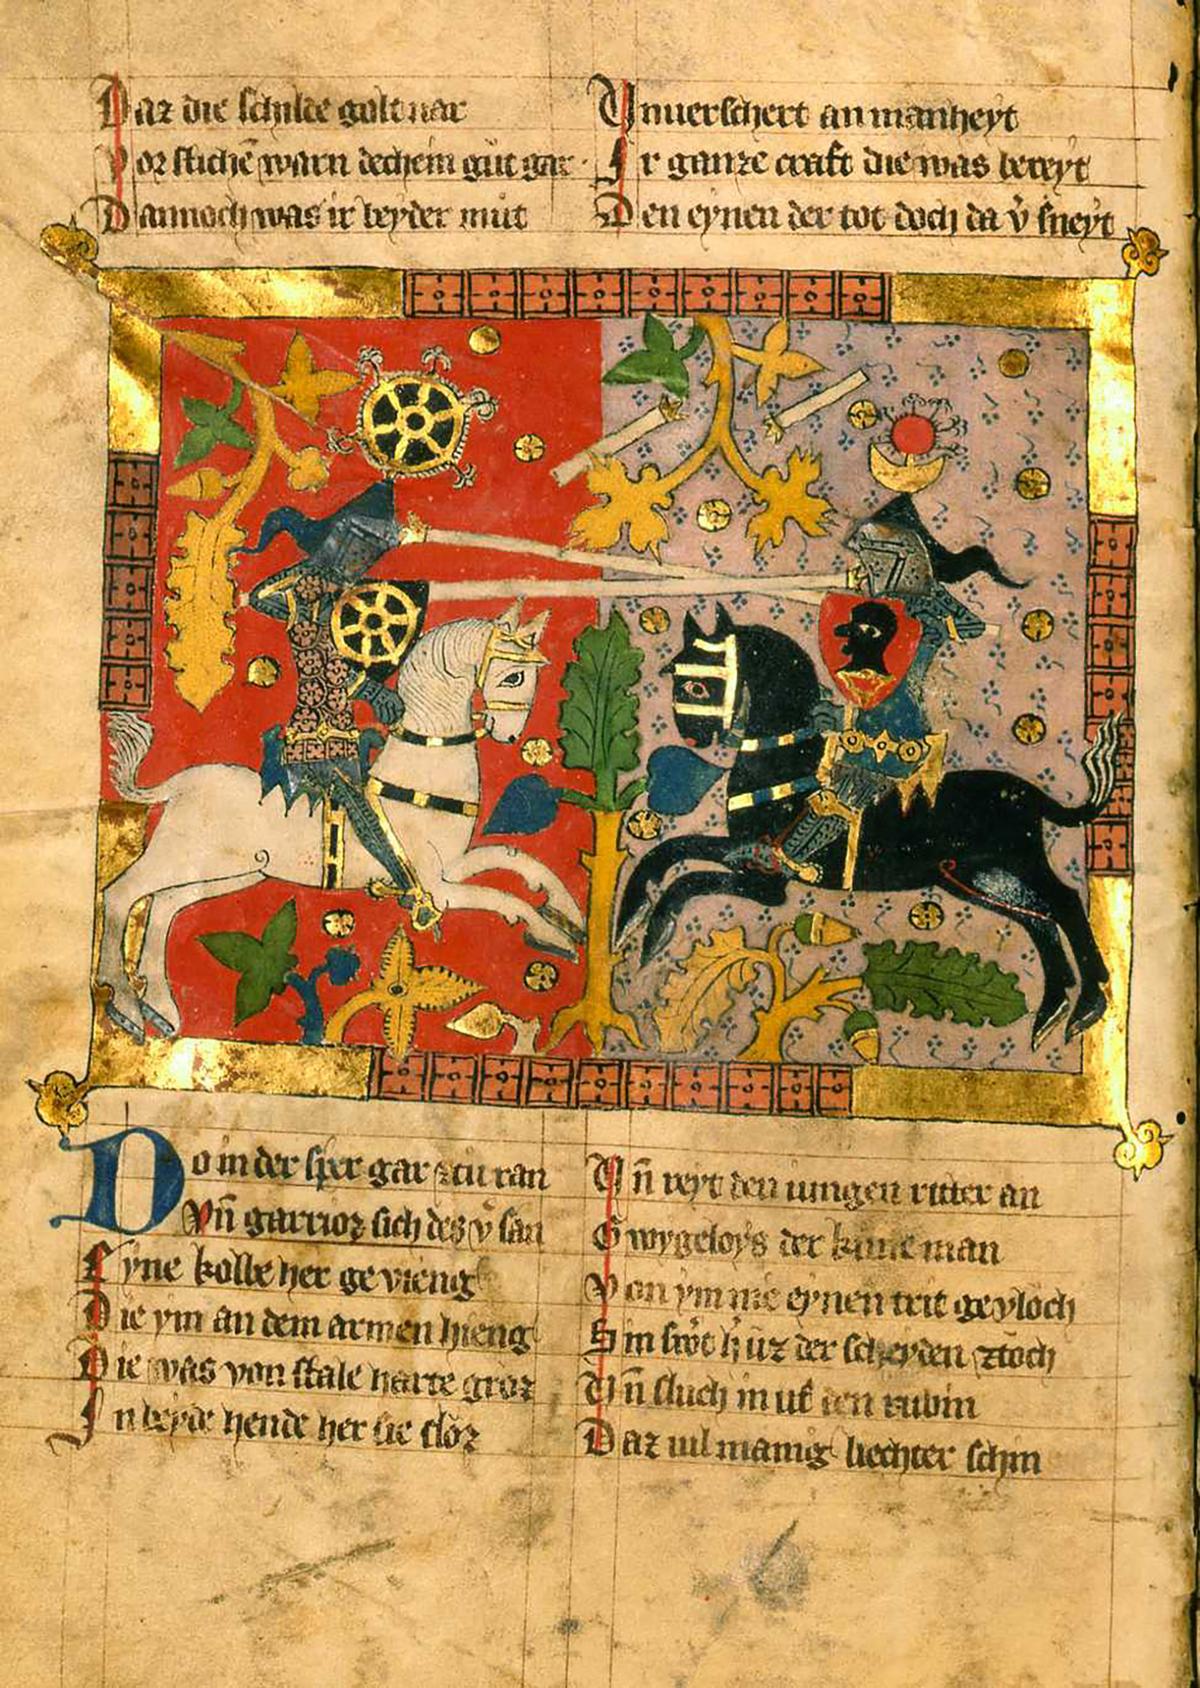  German manuscript detailing the Arthurian romance of Wigalois, 1372, by Jan con Bruswick, according to the colophon (fol. 117v). University of Leiden, Germany. (<a href="https://www.leidenspecialcollectionsblog.nl/articles/wigalois-a-german-arthurian-hero">Collection Leiden University Libraries</a>/ <a href="https://creativecommons.org/licenses/by/4.0/">CC BY 4.0 DEED</a>)